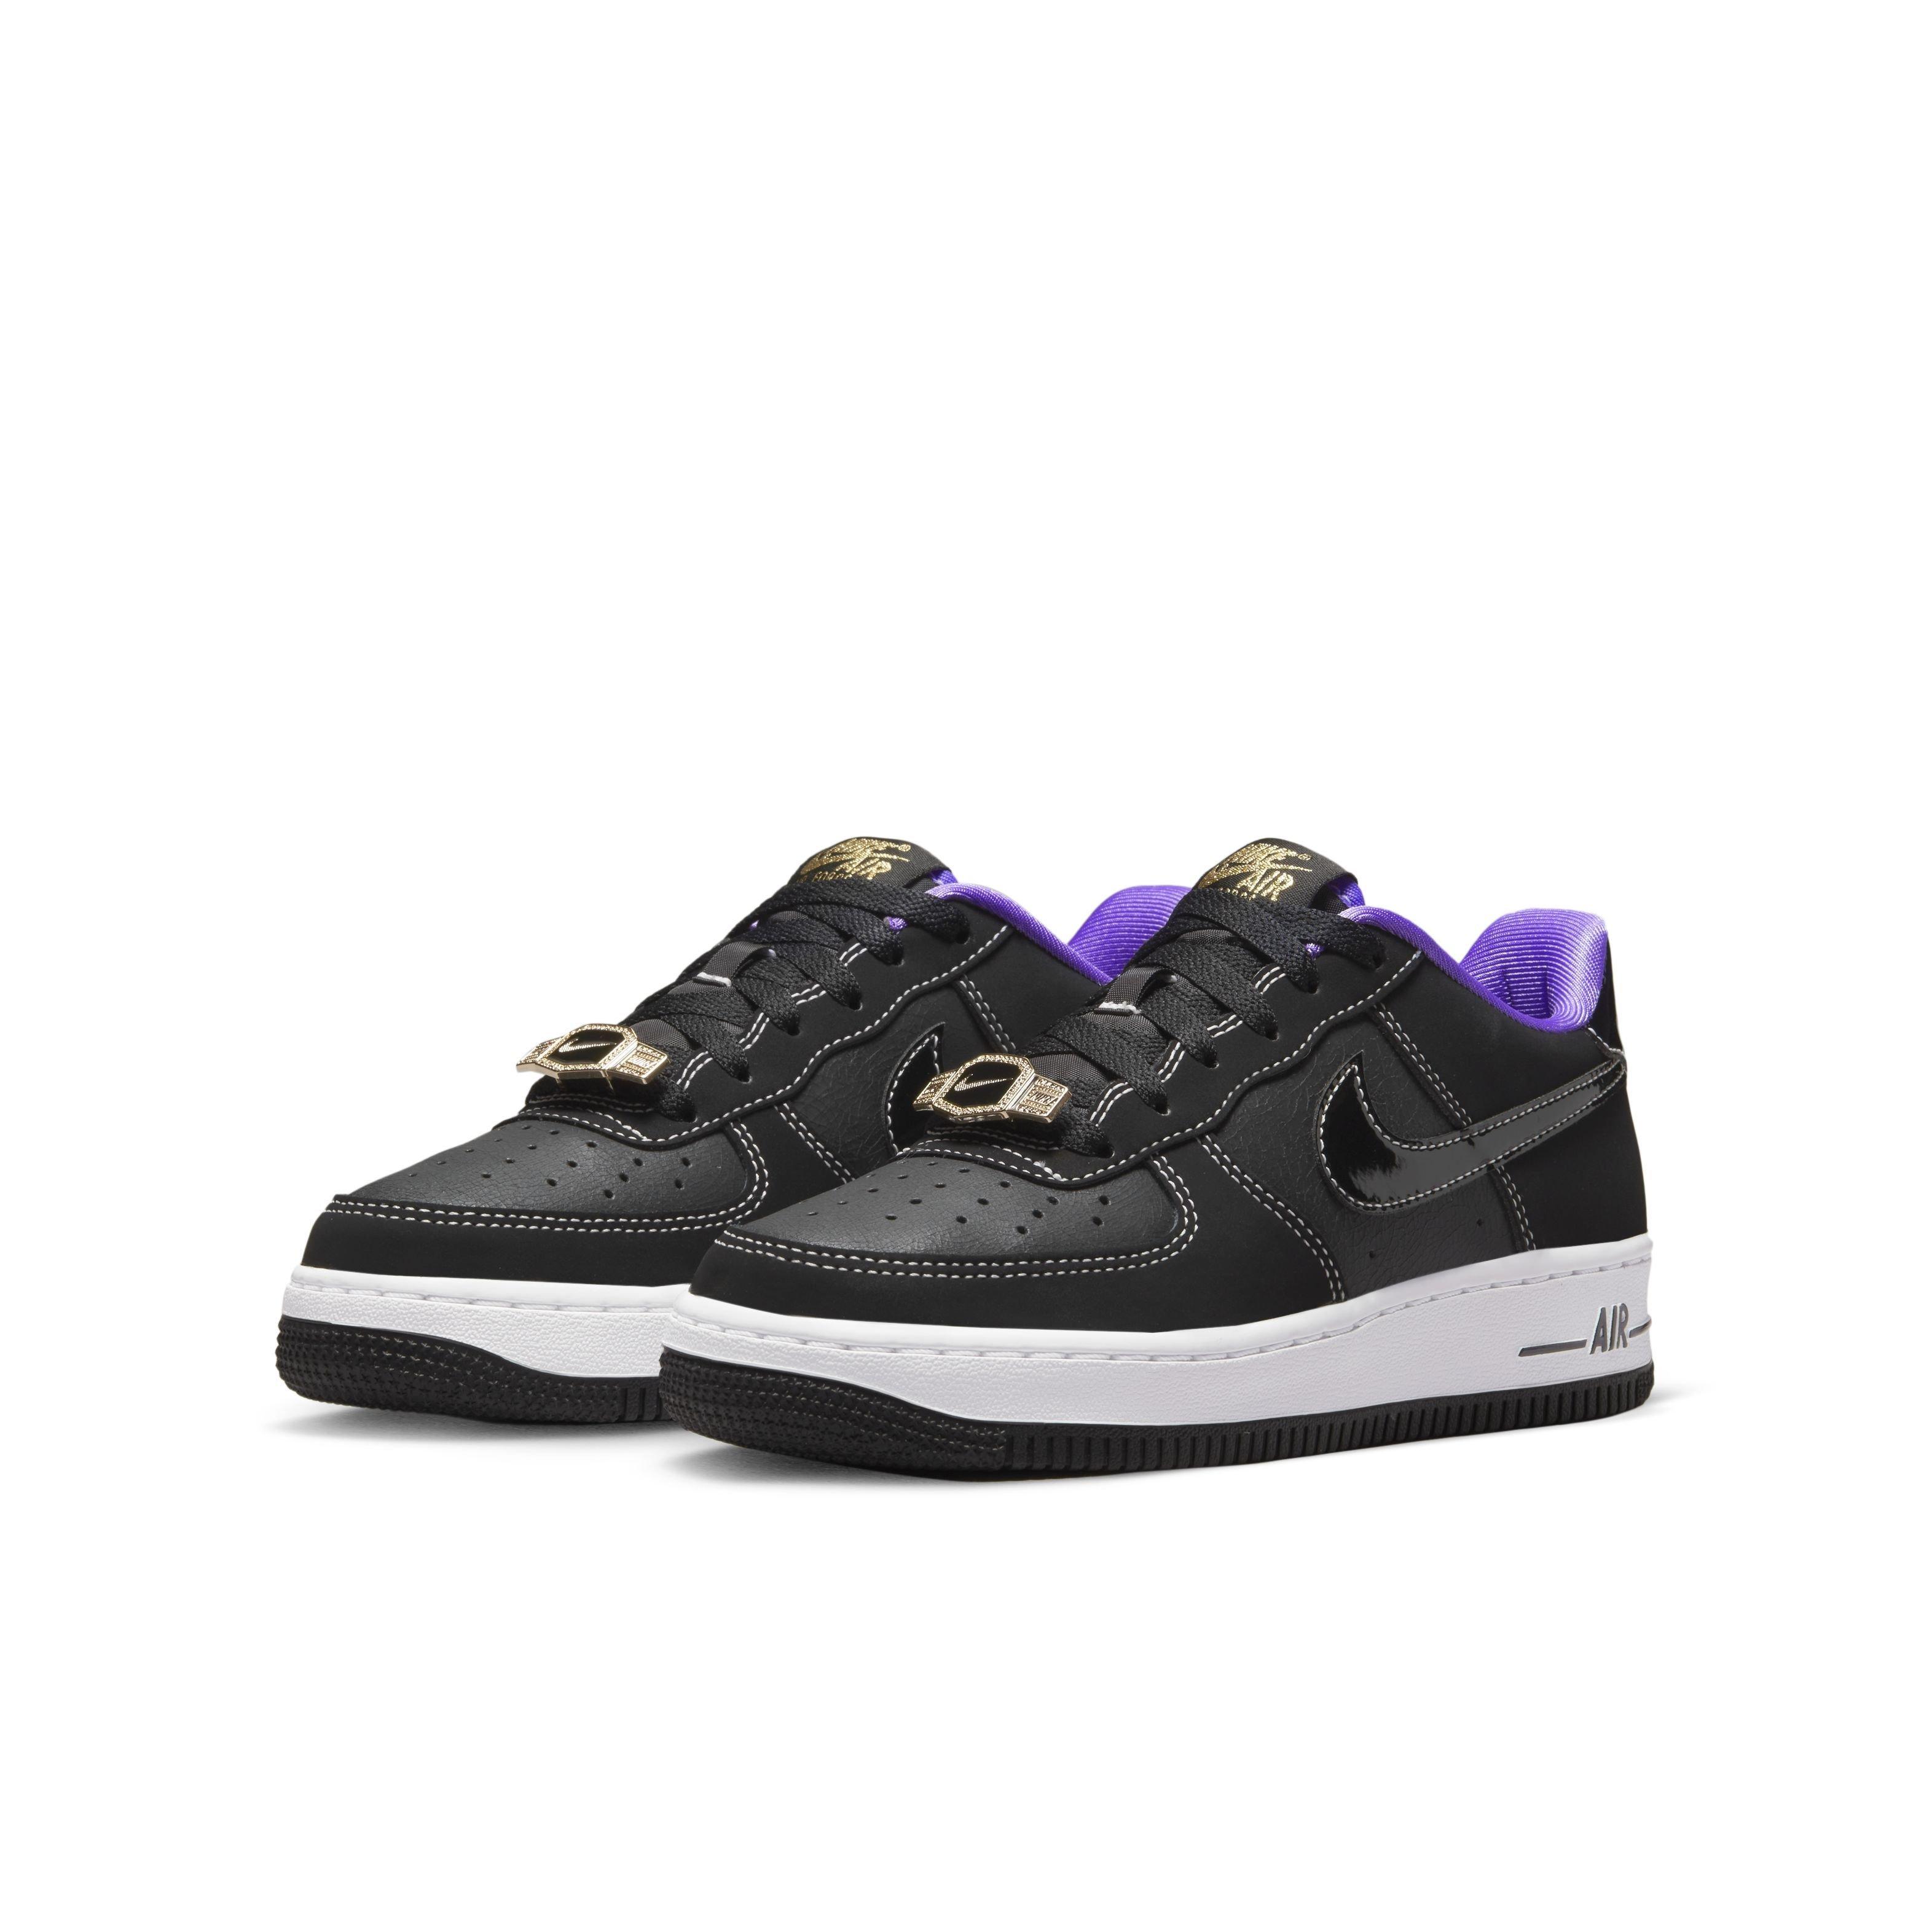 Nike Kid's Air Force 1 LV8 Shoes - Photon Dust / Black / Chlorophyll / —  Just For Sports